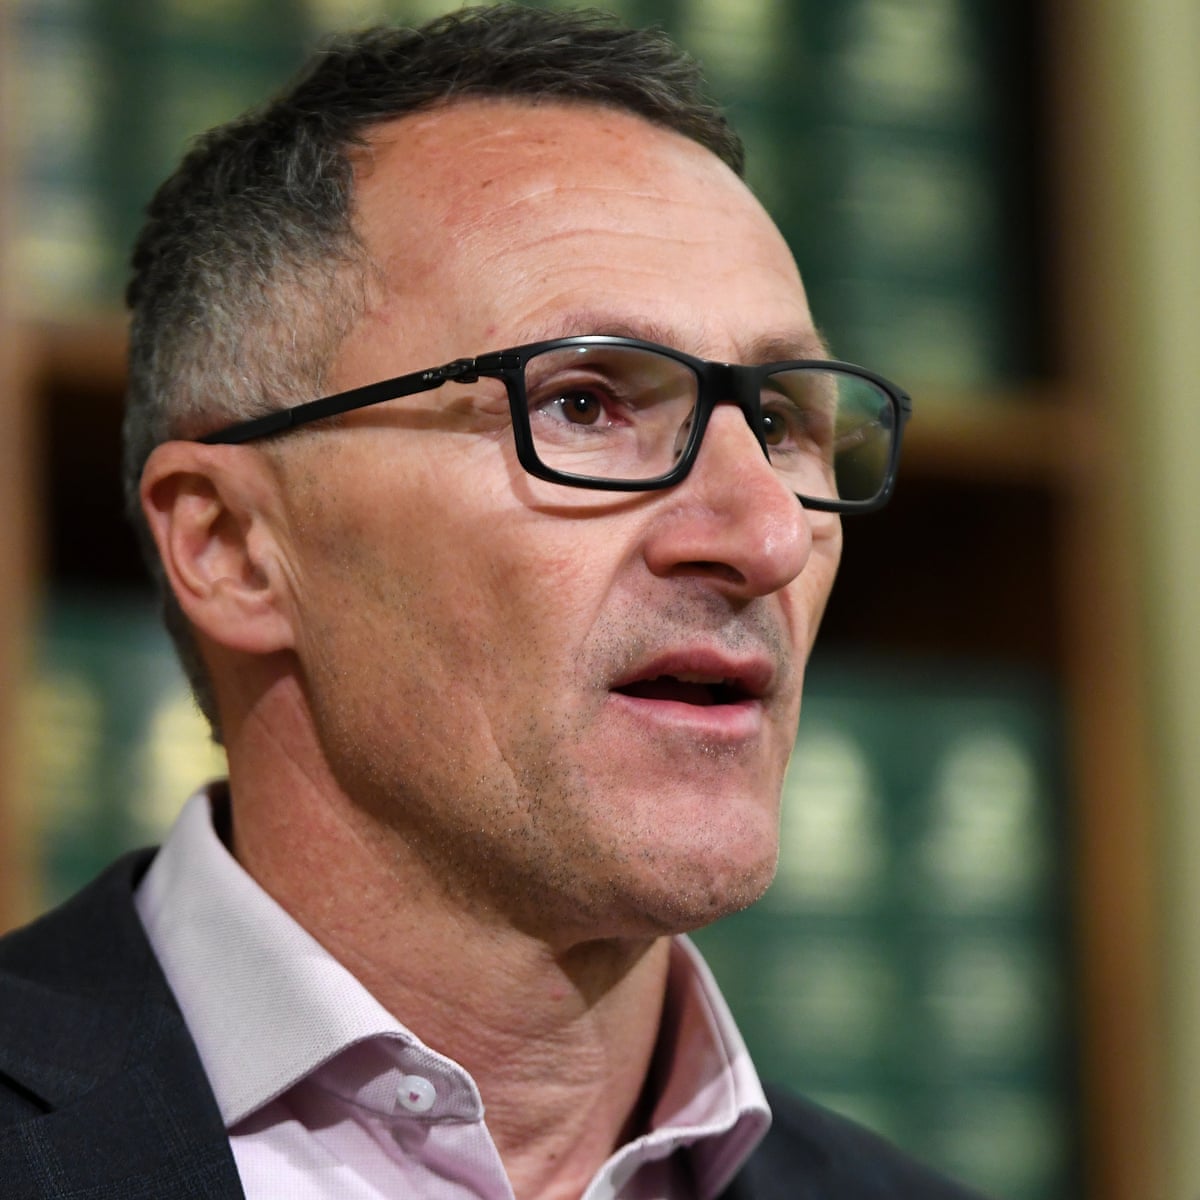 Natale Di Natale.Richard Di Natale Resigns As Greens Leader And Announces He Will Leave Politics Australian Greens The Guardian